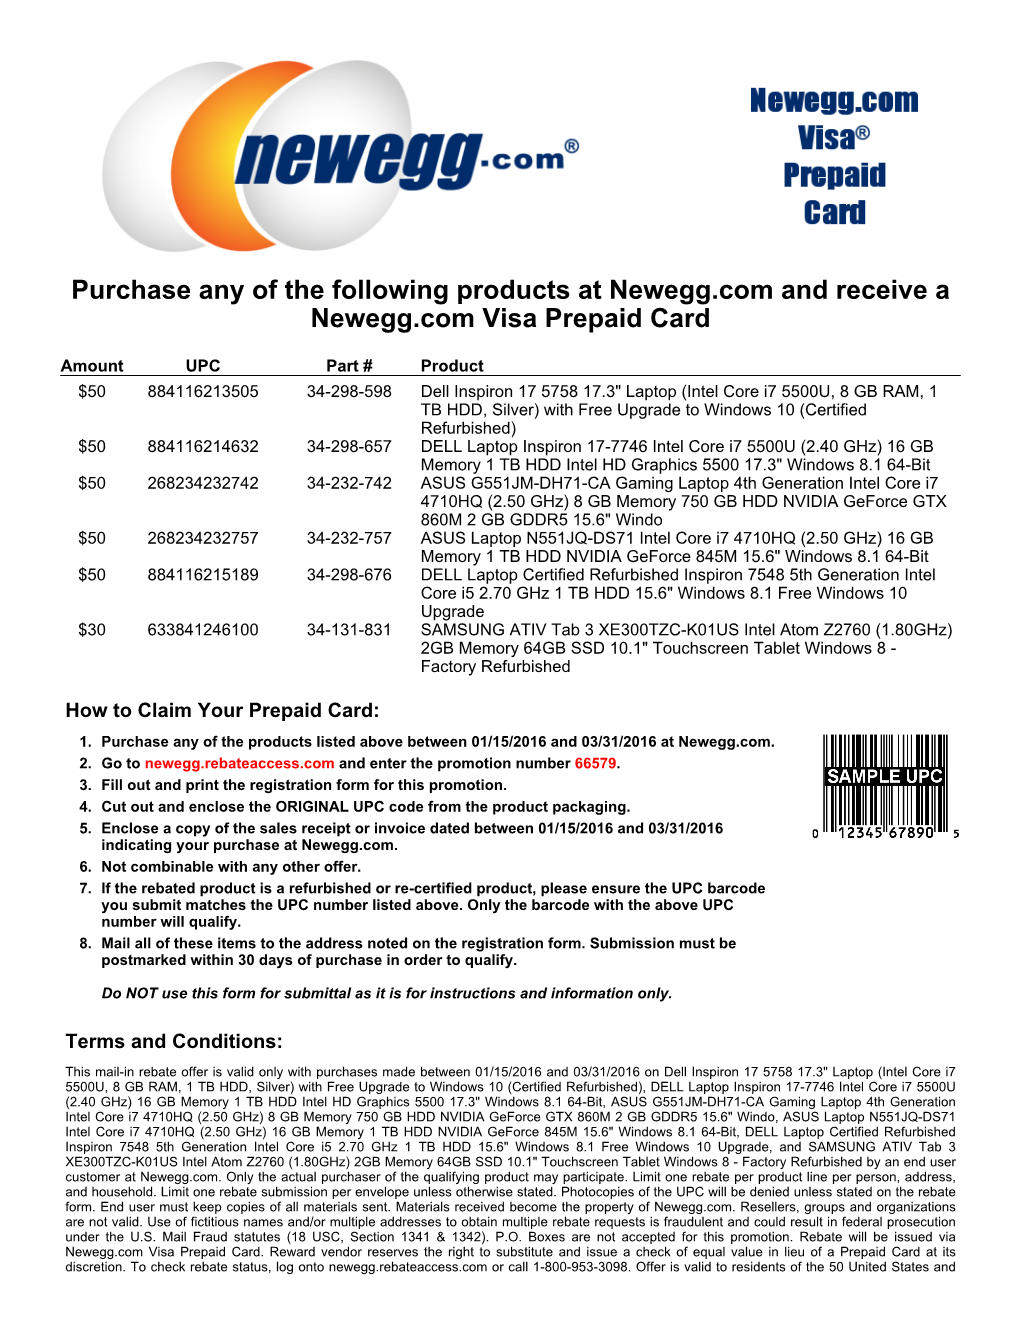 Purchase Any of the Following Products at Newegg.Com and Receive a Newegg.Com Visa Prepaid Card